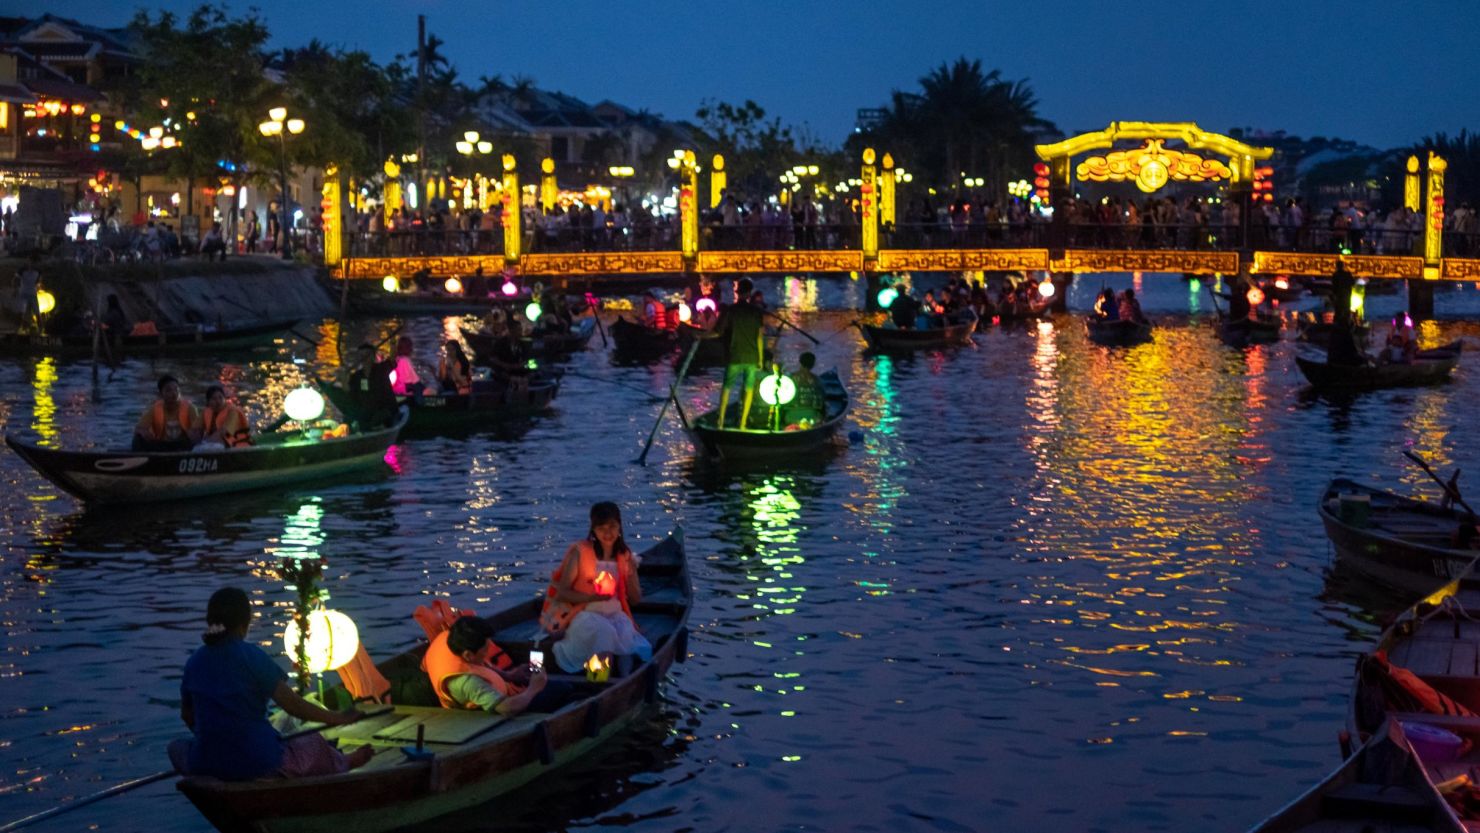 HOI AN, VIETNAM - APRIL 24: Tourists, mostly domestic, take a boat tour through the Thu Bon river on April 24, 2021 in Hoi An, Vietnam. Hoi An, a UNESCO heritage site, once a hot spot favorited by foreign tourists, has had to undergo the tribulations of survival amid Covid-19 impacts. The number of domestic visitors has begun rising thanks to the effort of key players in the tourism sector by decreasing airfares, entrance fees and adding more tourism products that fit the domestic tourist market, such as opening pedestrian zones, night markets, craft villages and traditional games. (Photo by Linh Pham/Getty Images).